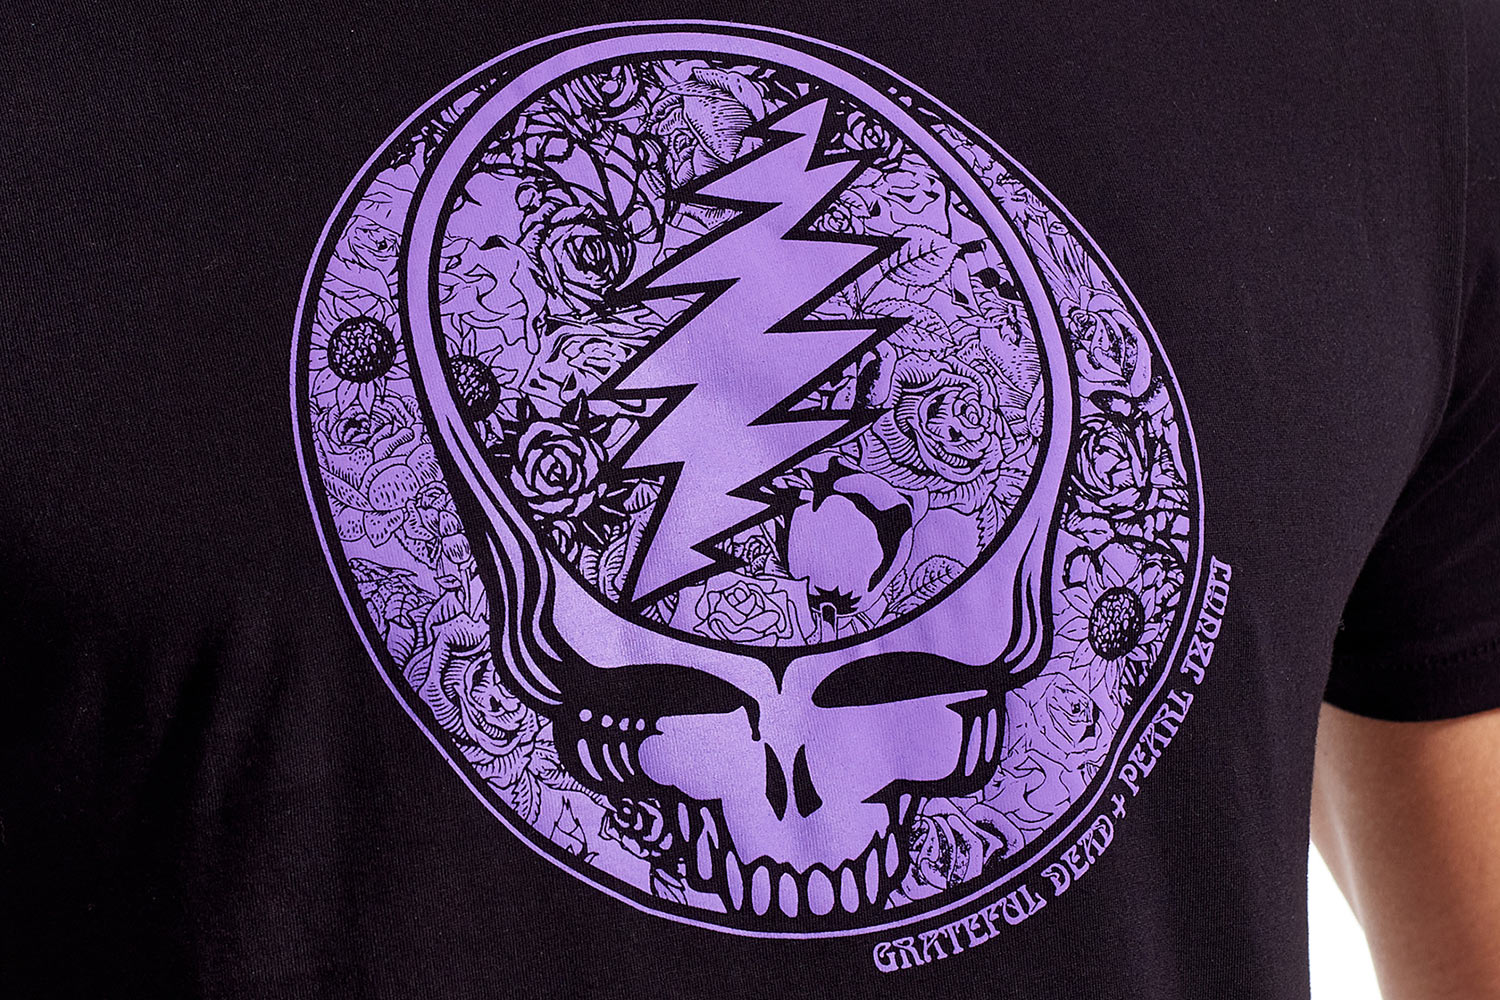 Pearl Izumi Grateful Dead limited edition Rambler collection, retro 1972 Europe Summer Tour inspired cycling kit, Steal Your Face tee